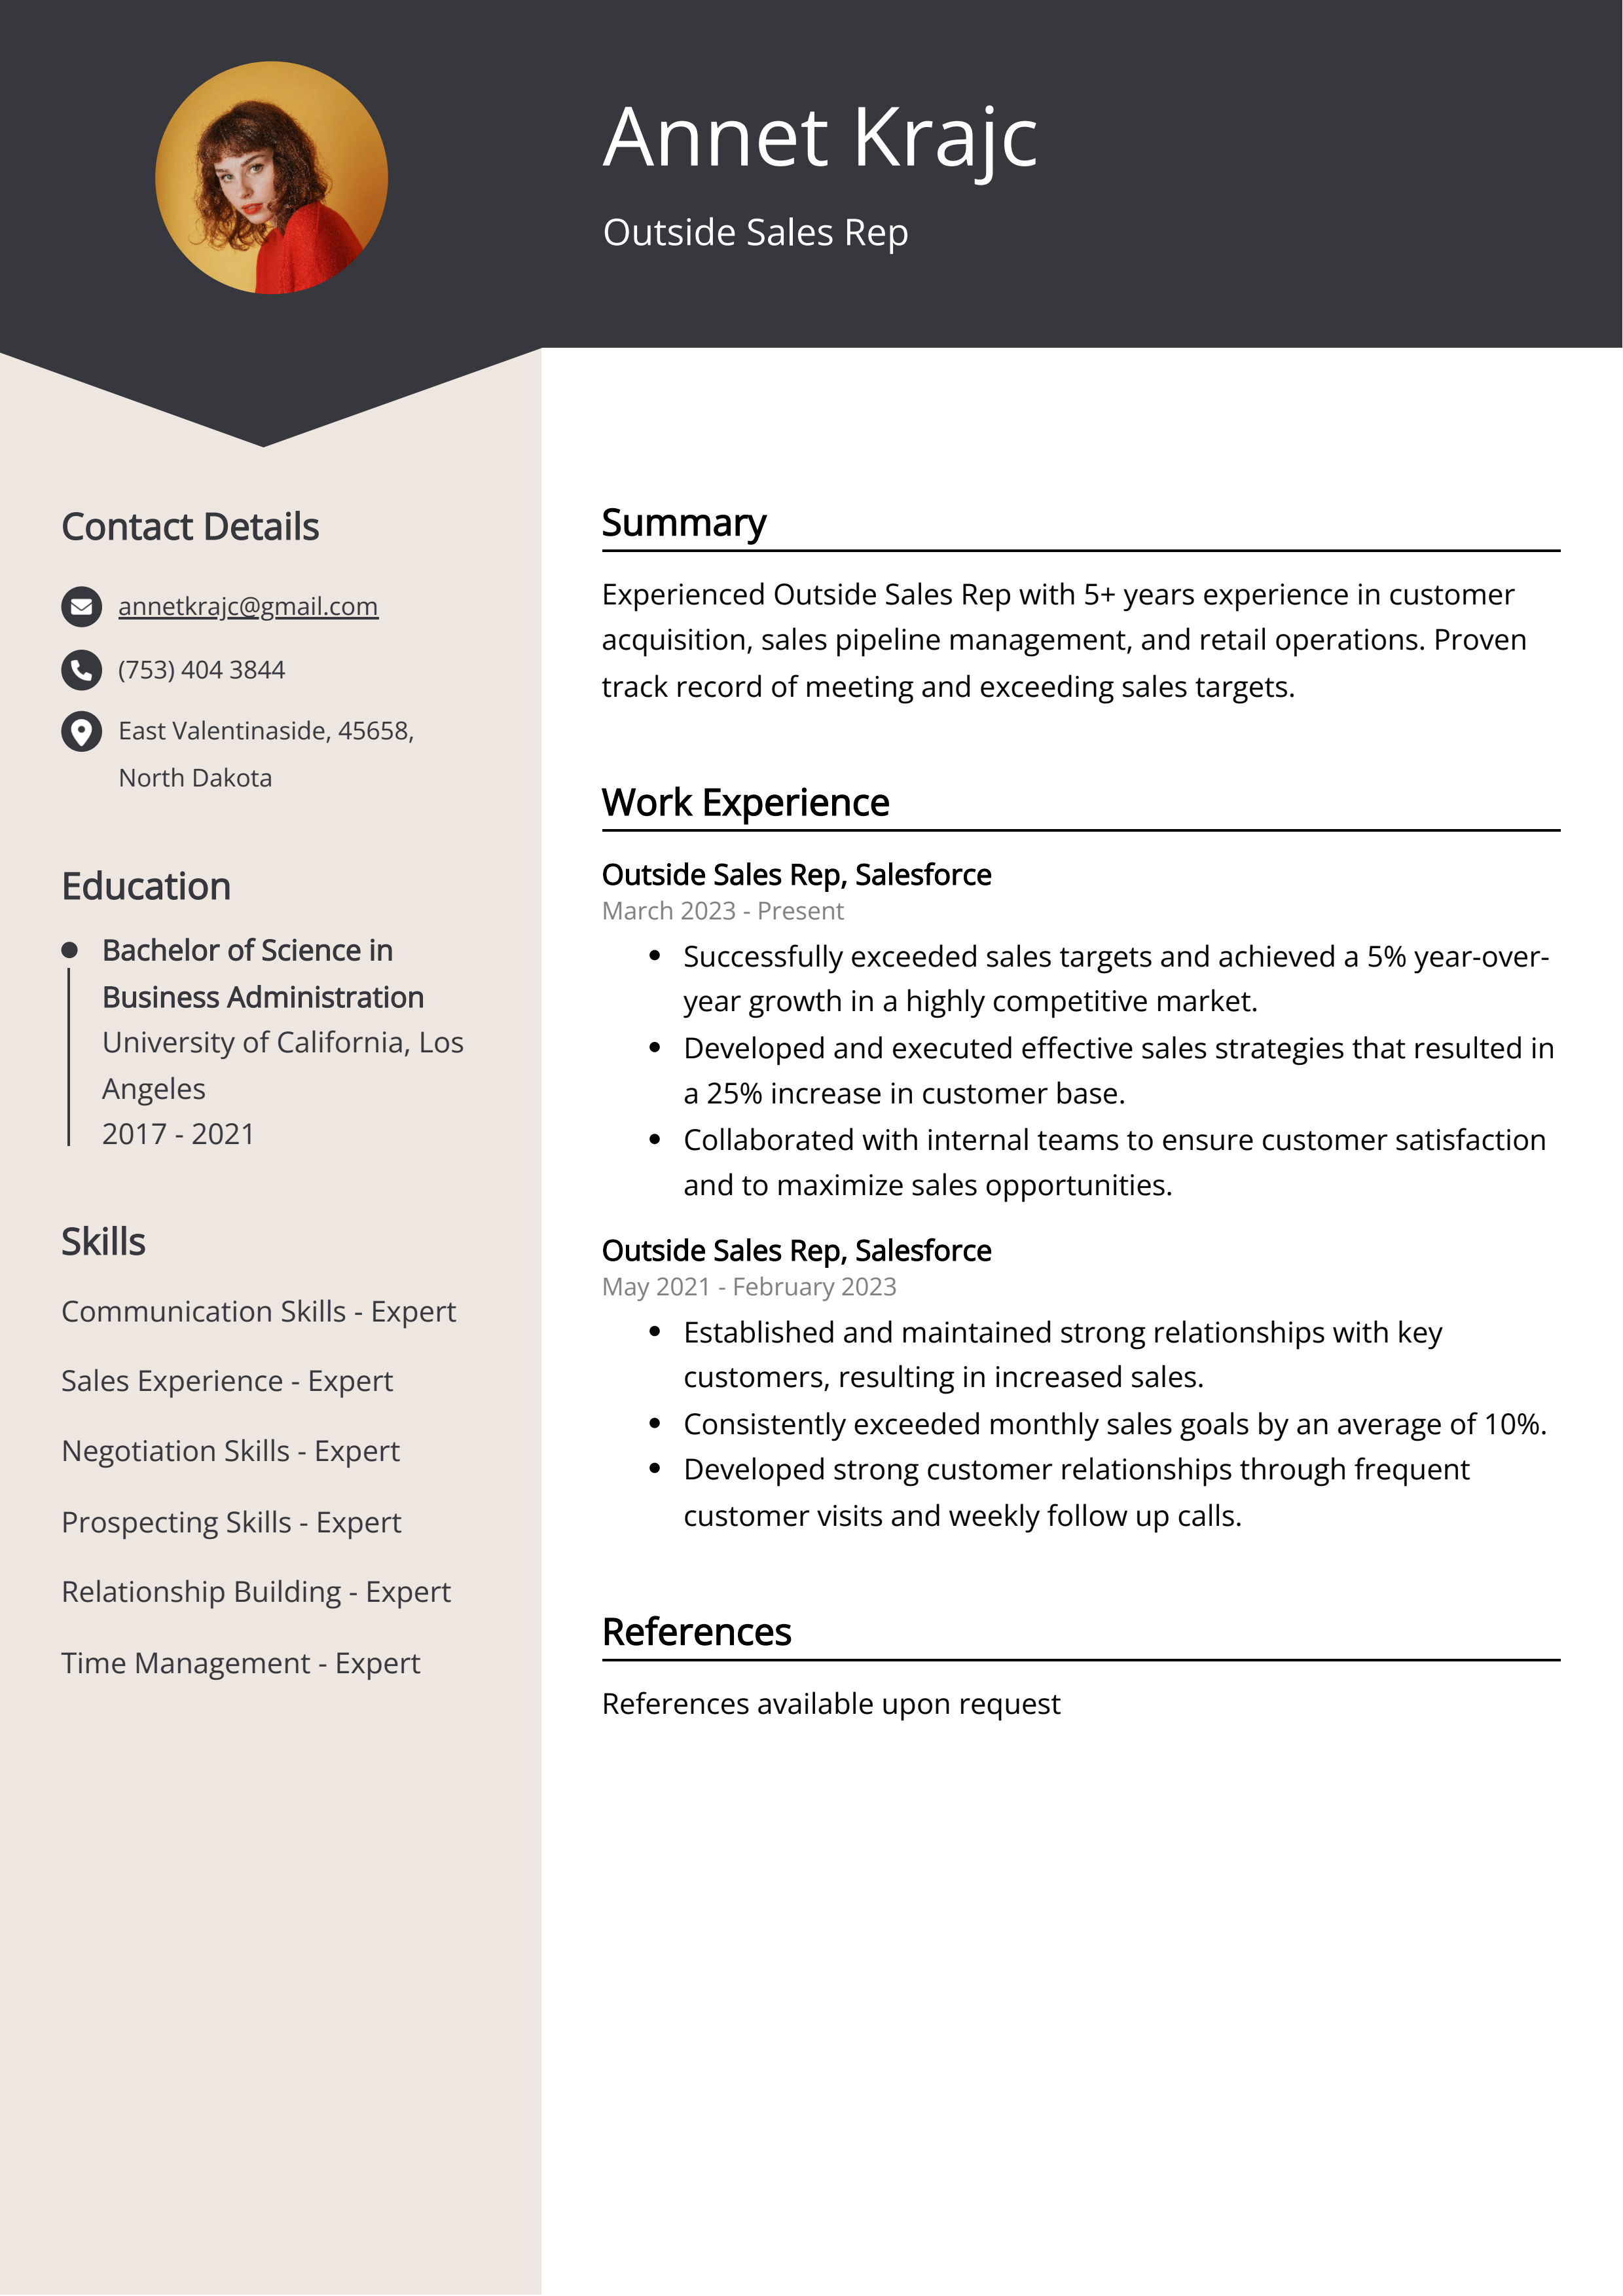 Outside Sales Rep CV Example